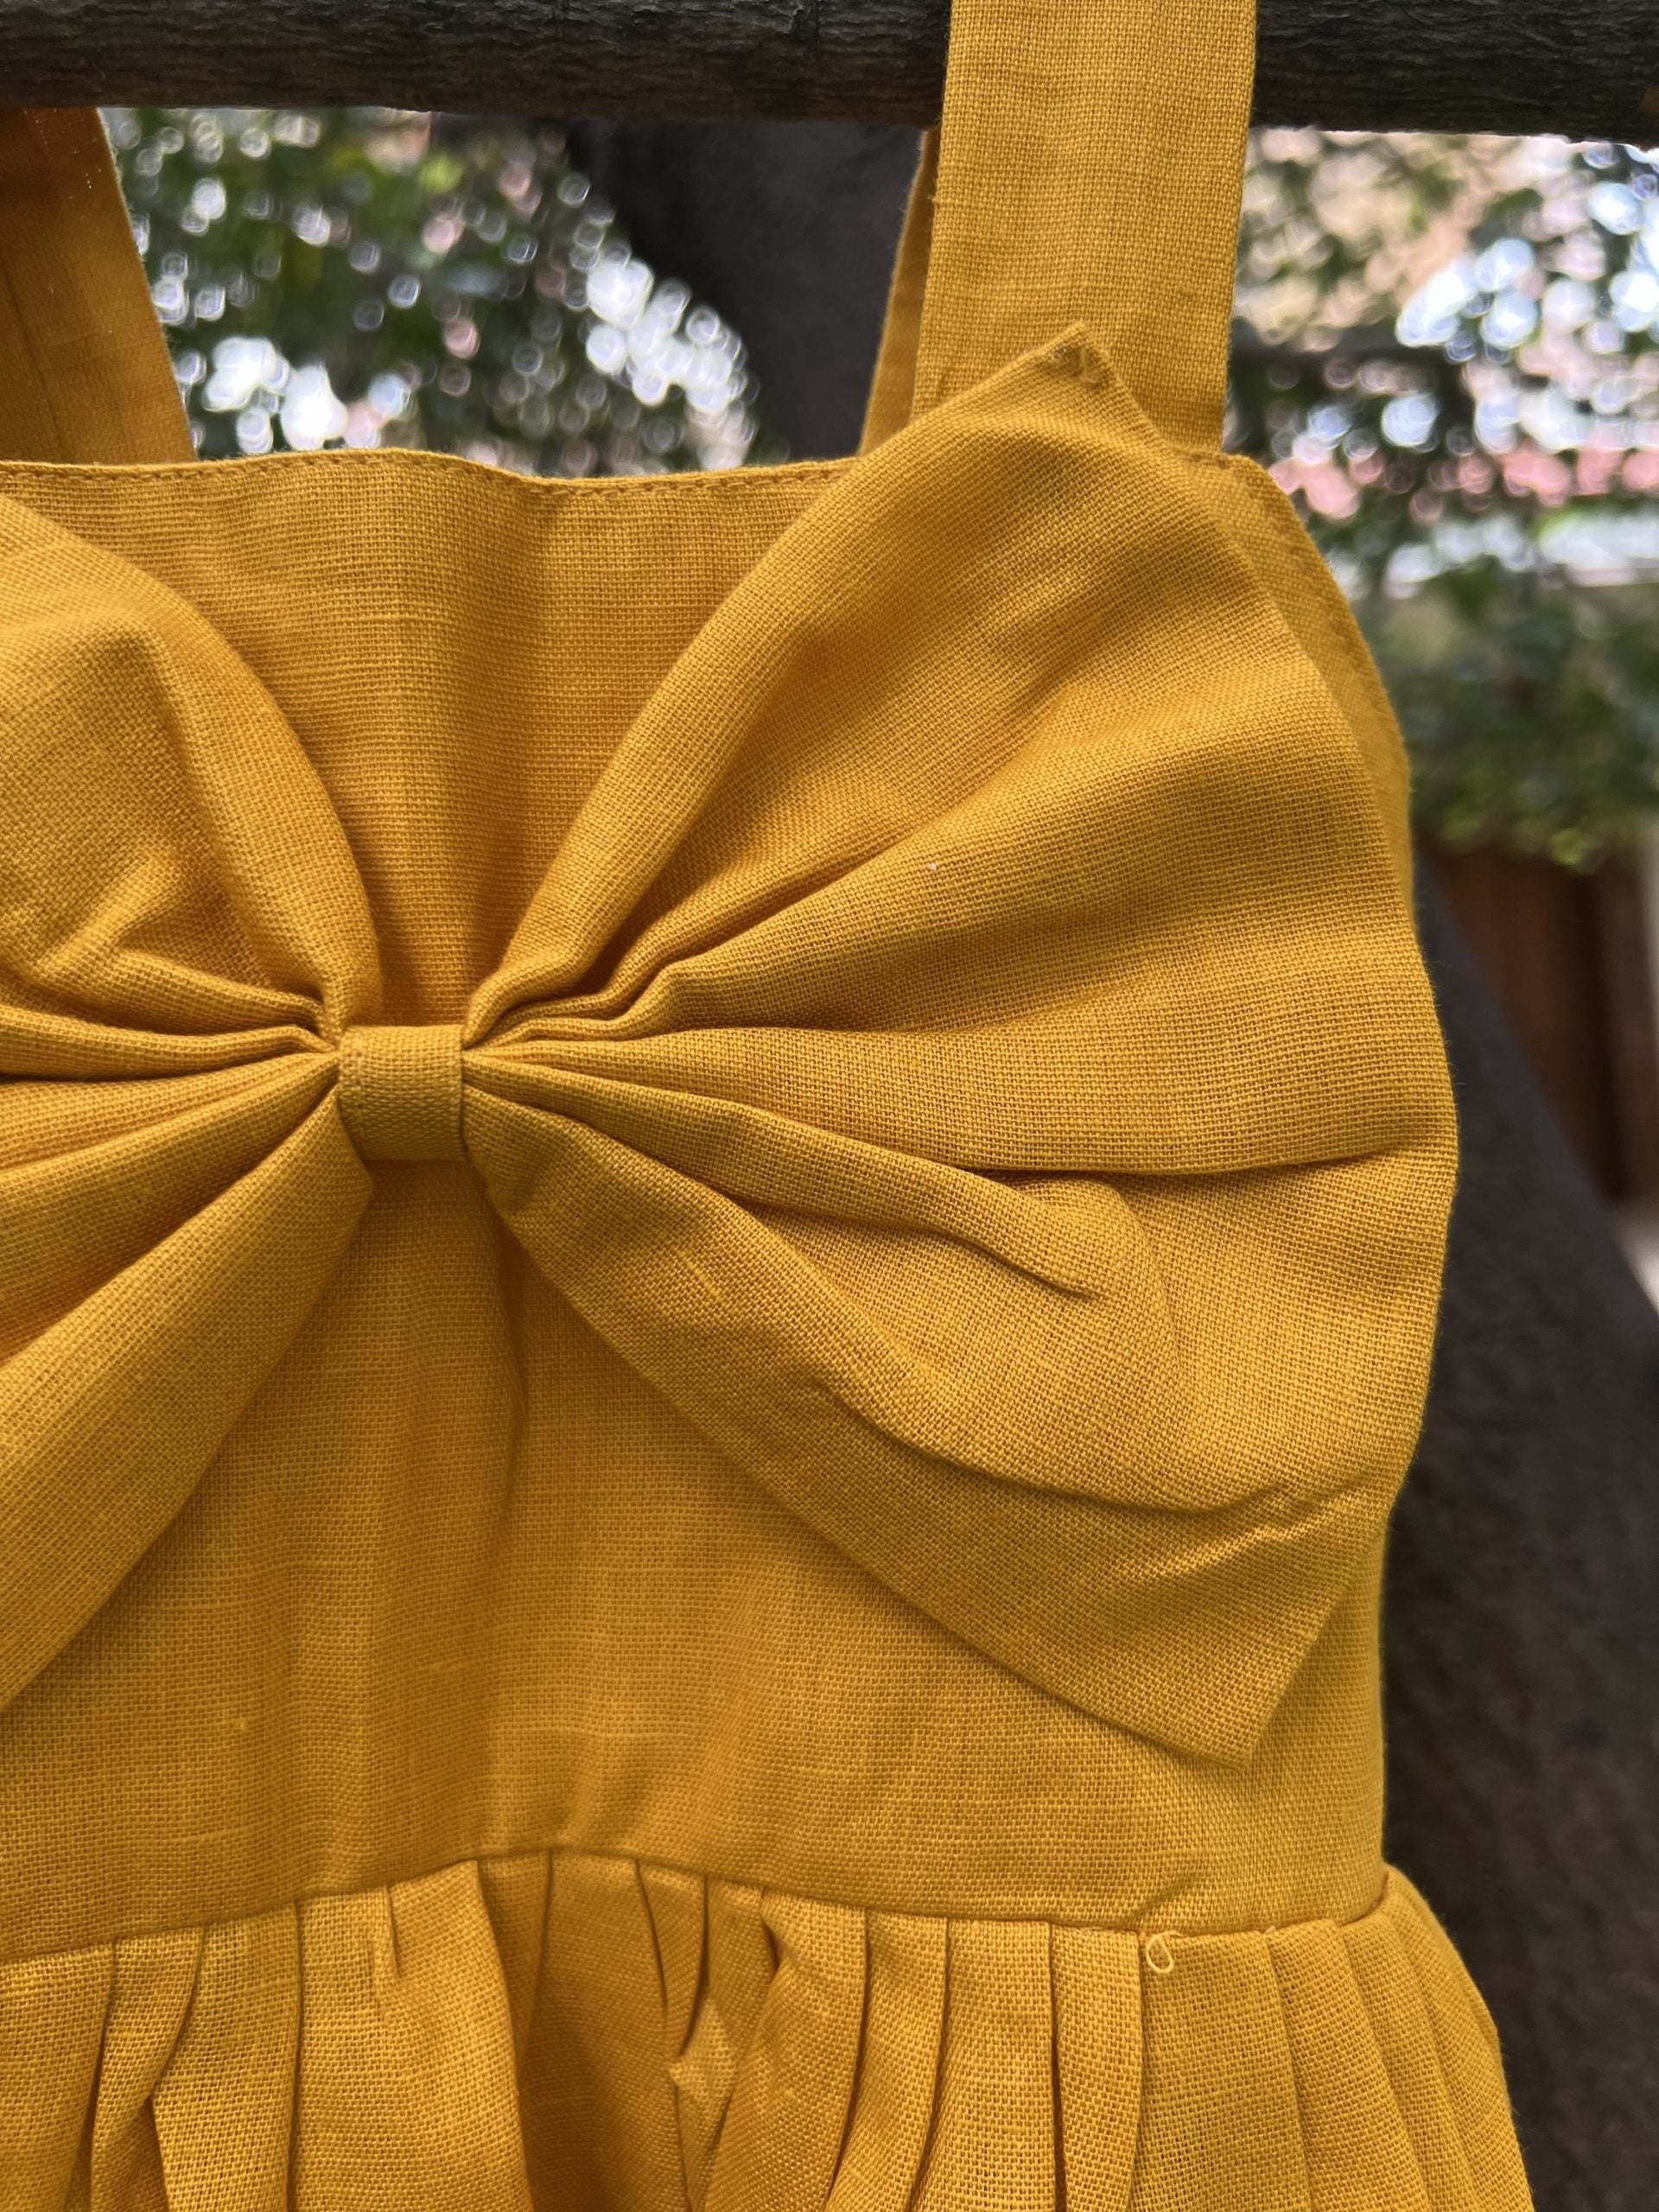 Yellow Dress with Bow